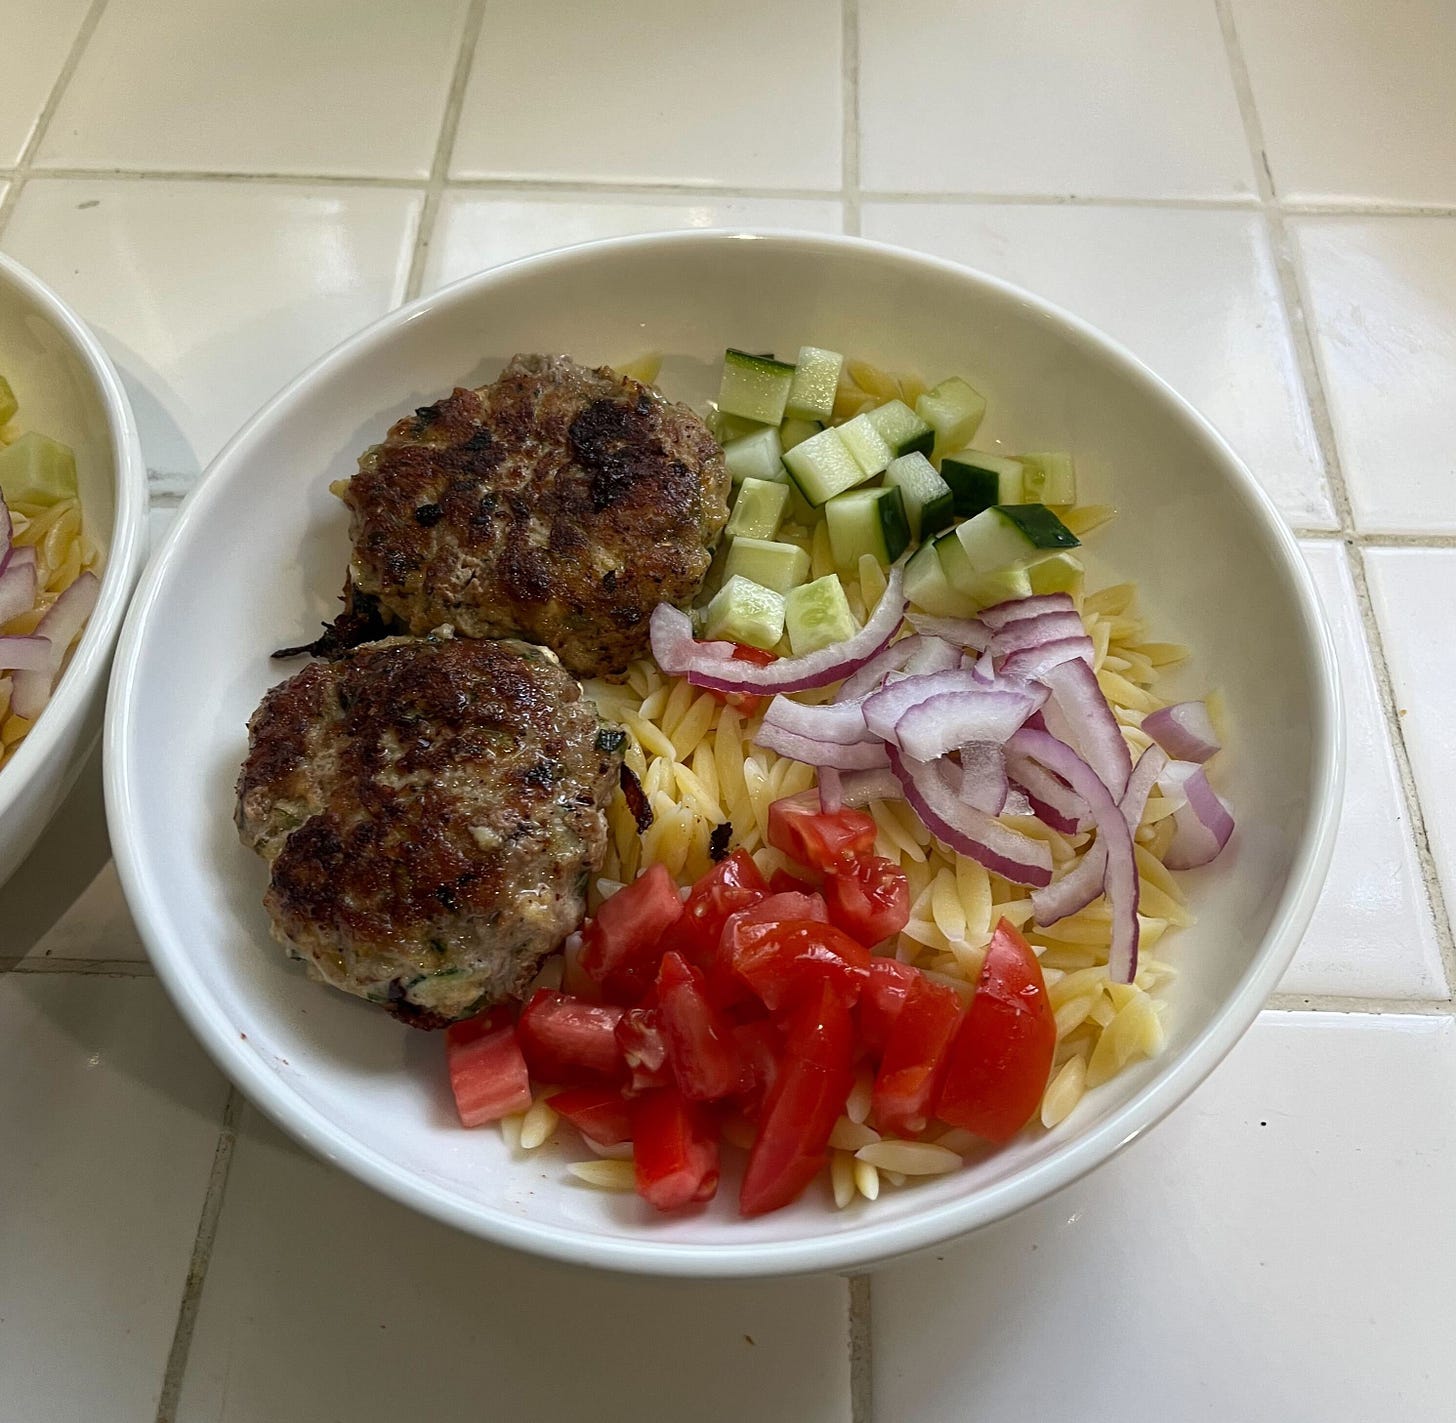 Pork patties with orzo, tomatoes, cucumber and red onion